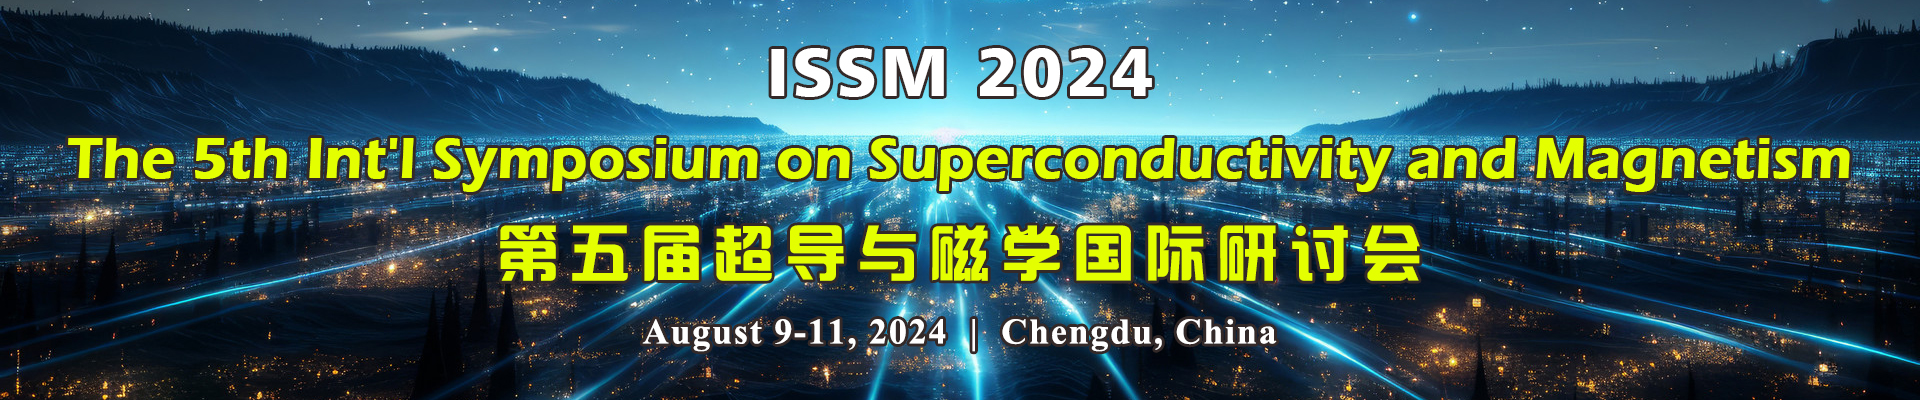 The 5th Int'l Symposium on Superconductivity and Magnetism (ISSM 2024), Chengdu, Sichuan, China